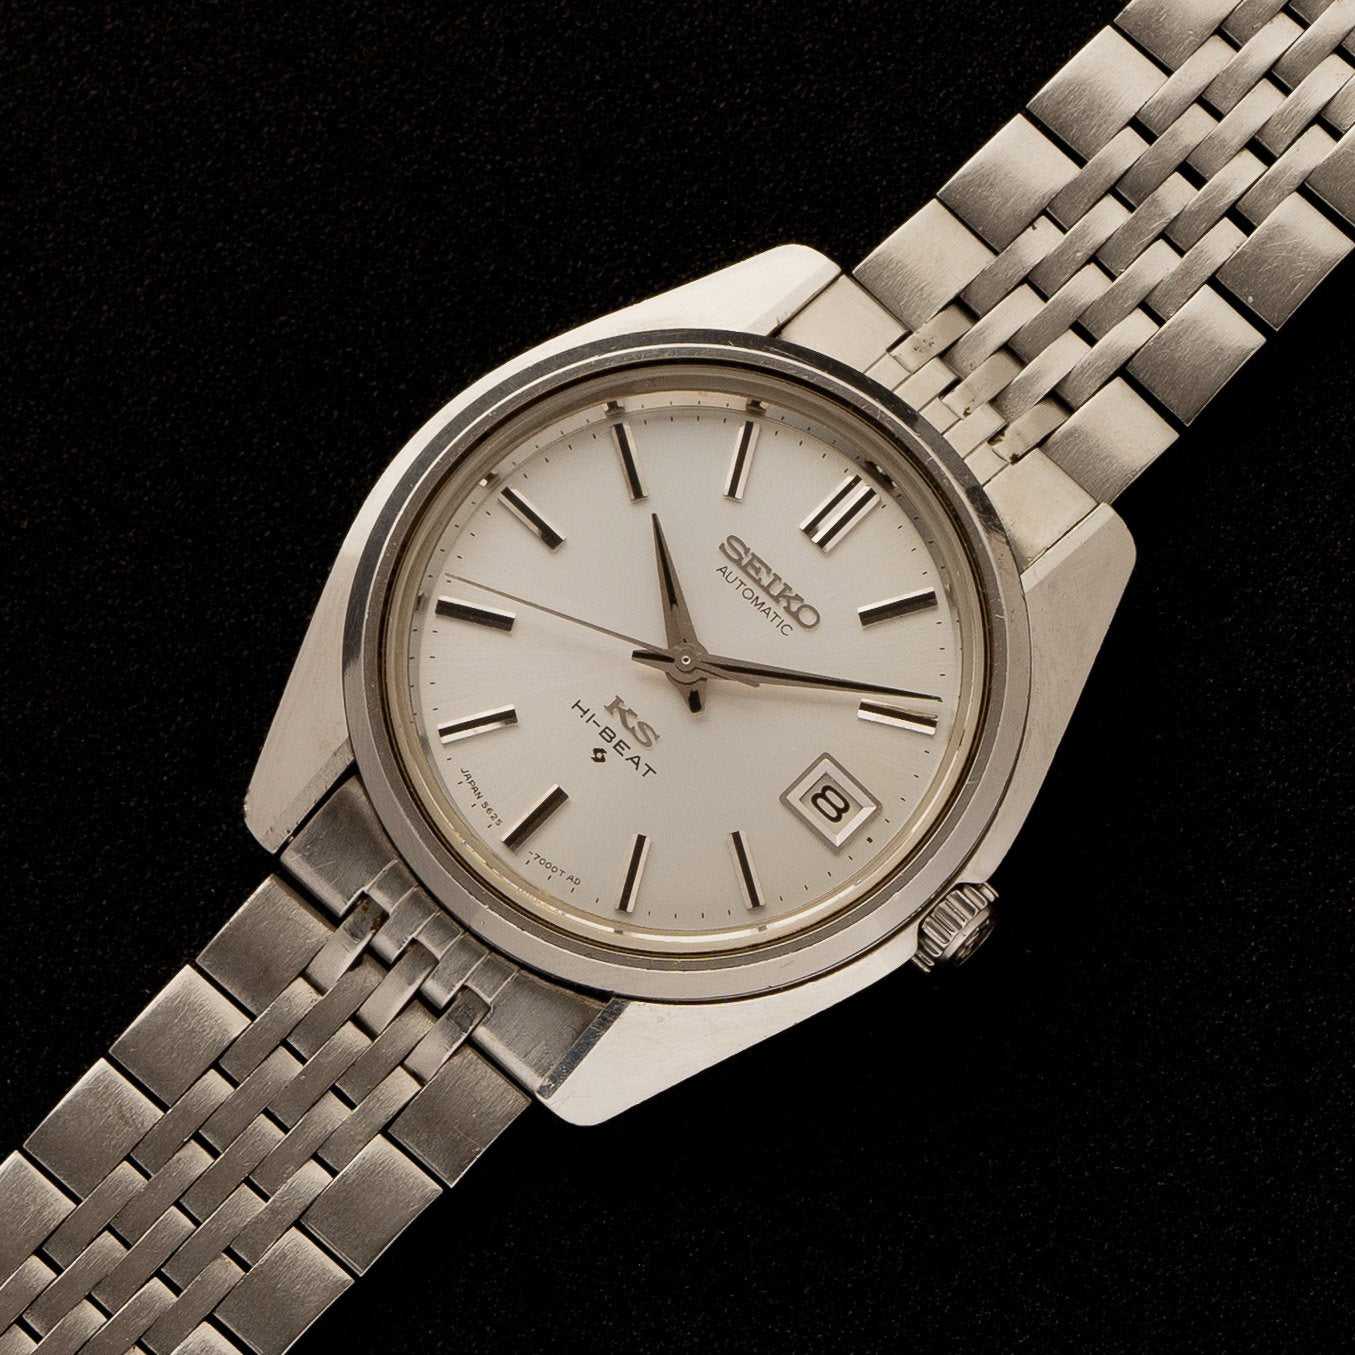 Seiko 36mm GS Date quick set ok Gold medal for Rs.46,987 for sale from a  Seller on Chrono24